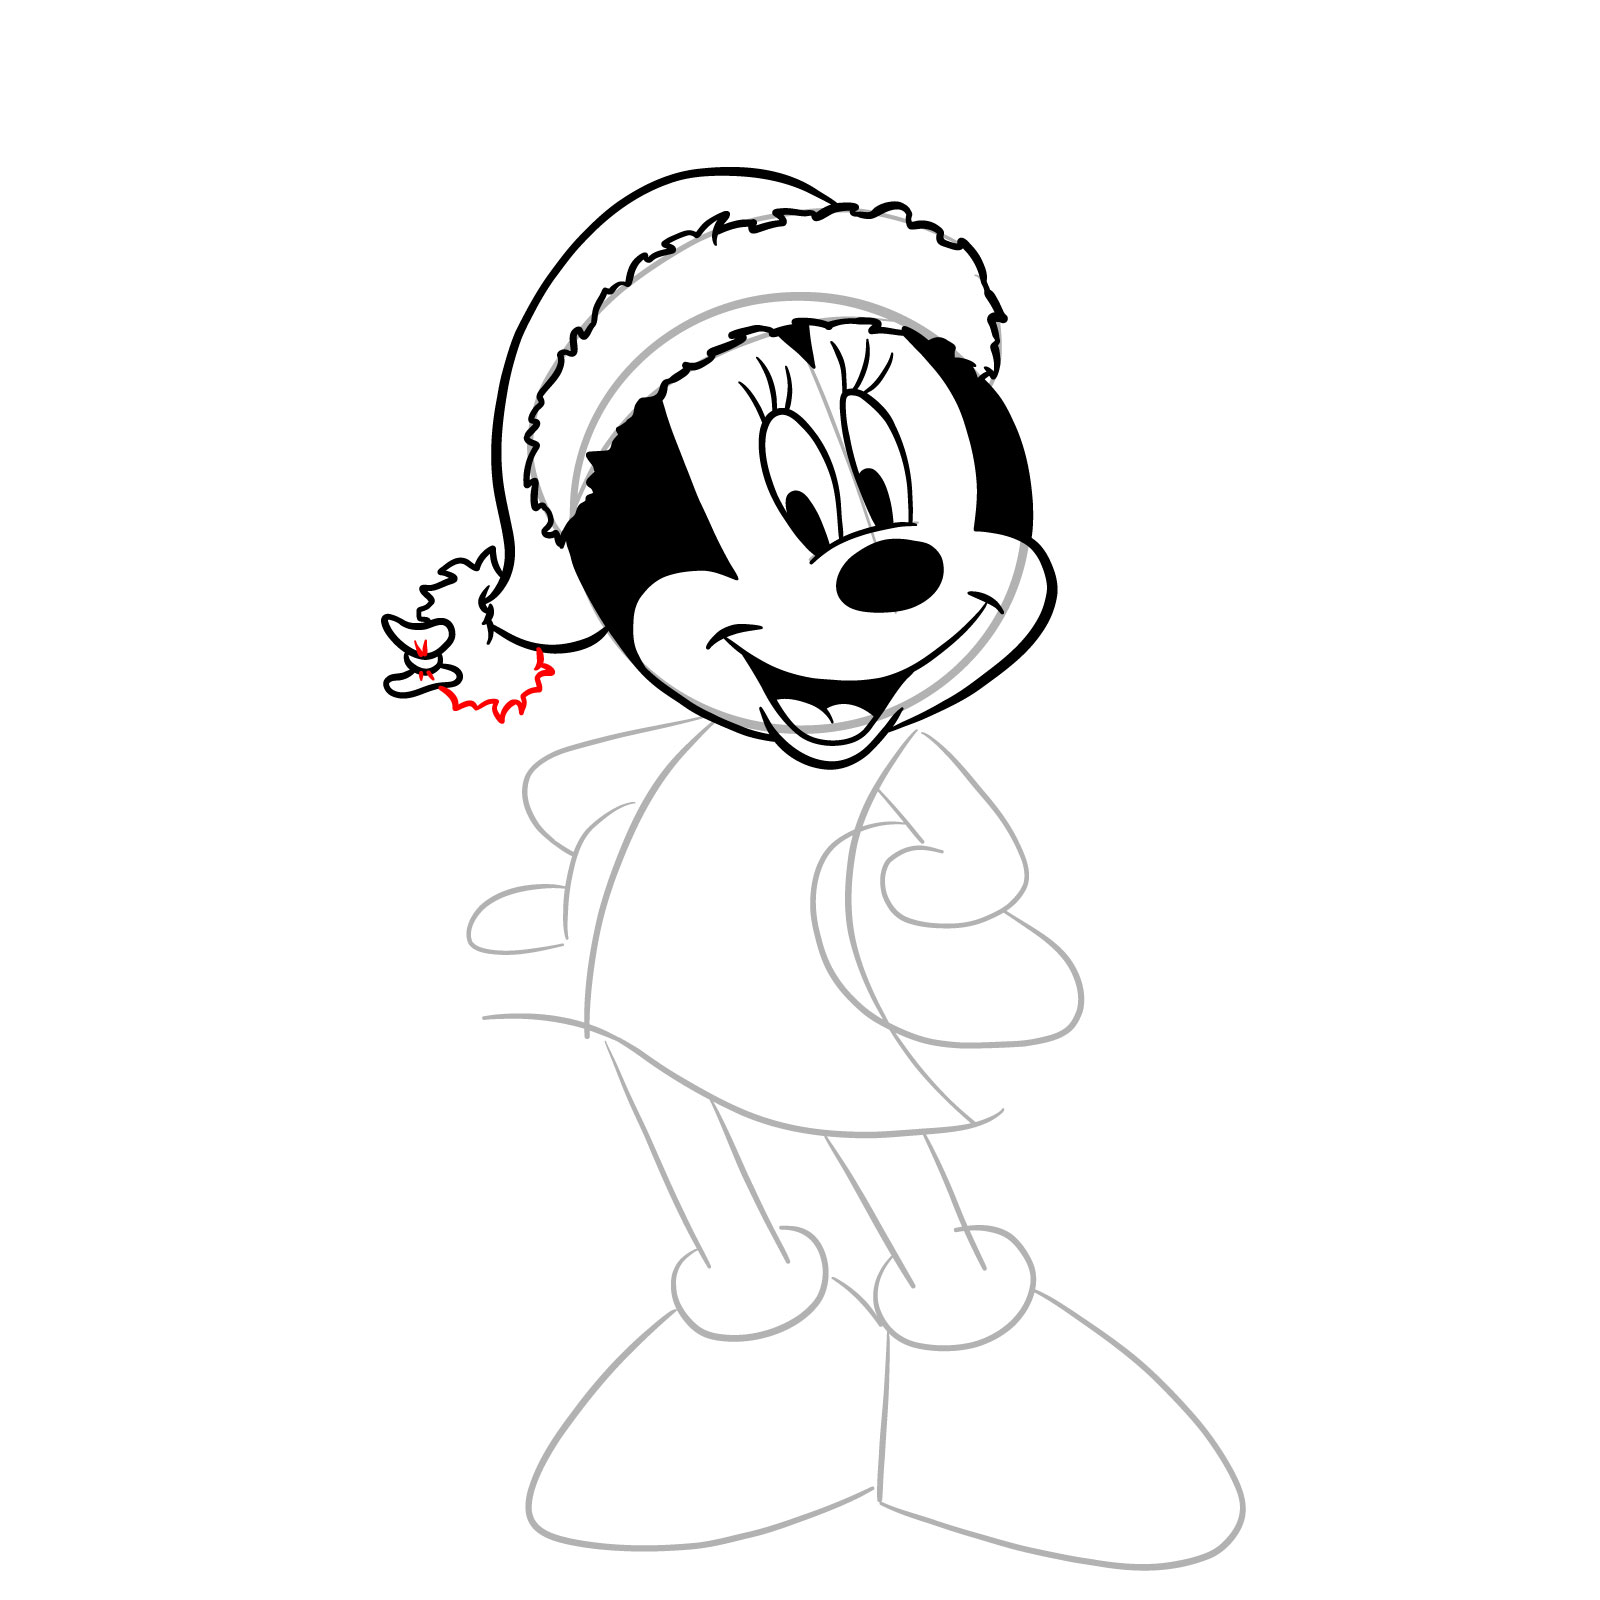 How to draw Minnie in a Christmas dress - step 16